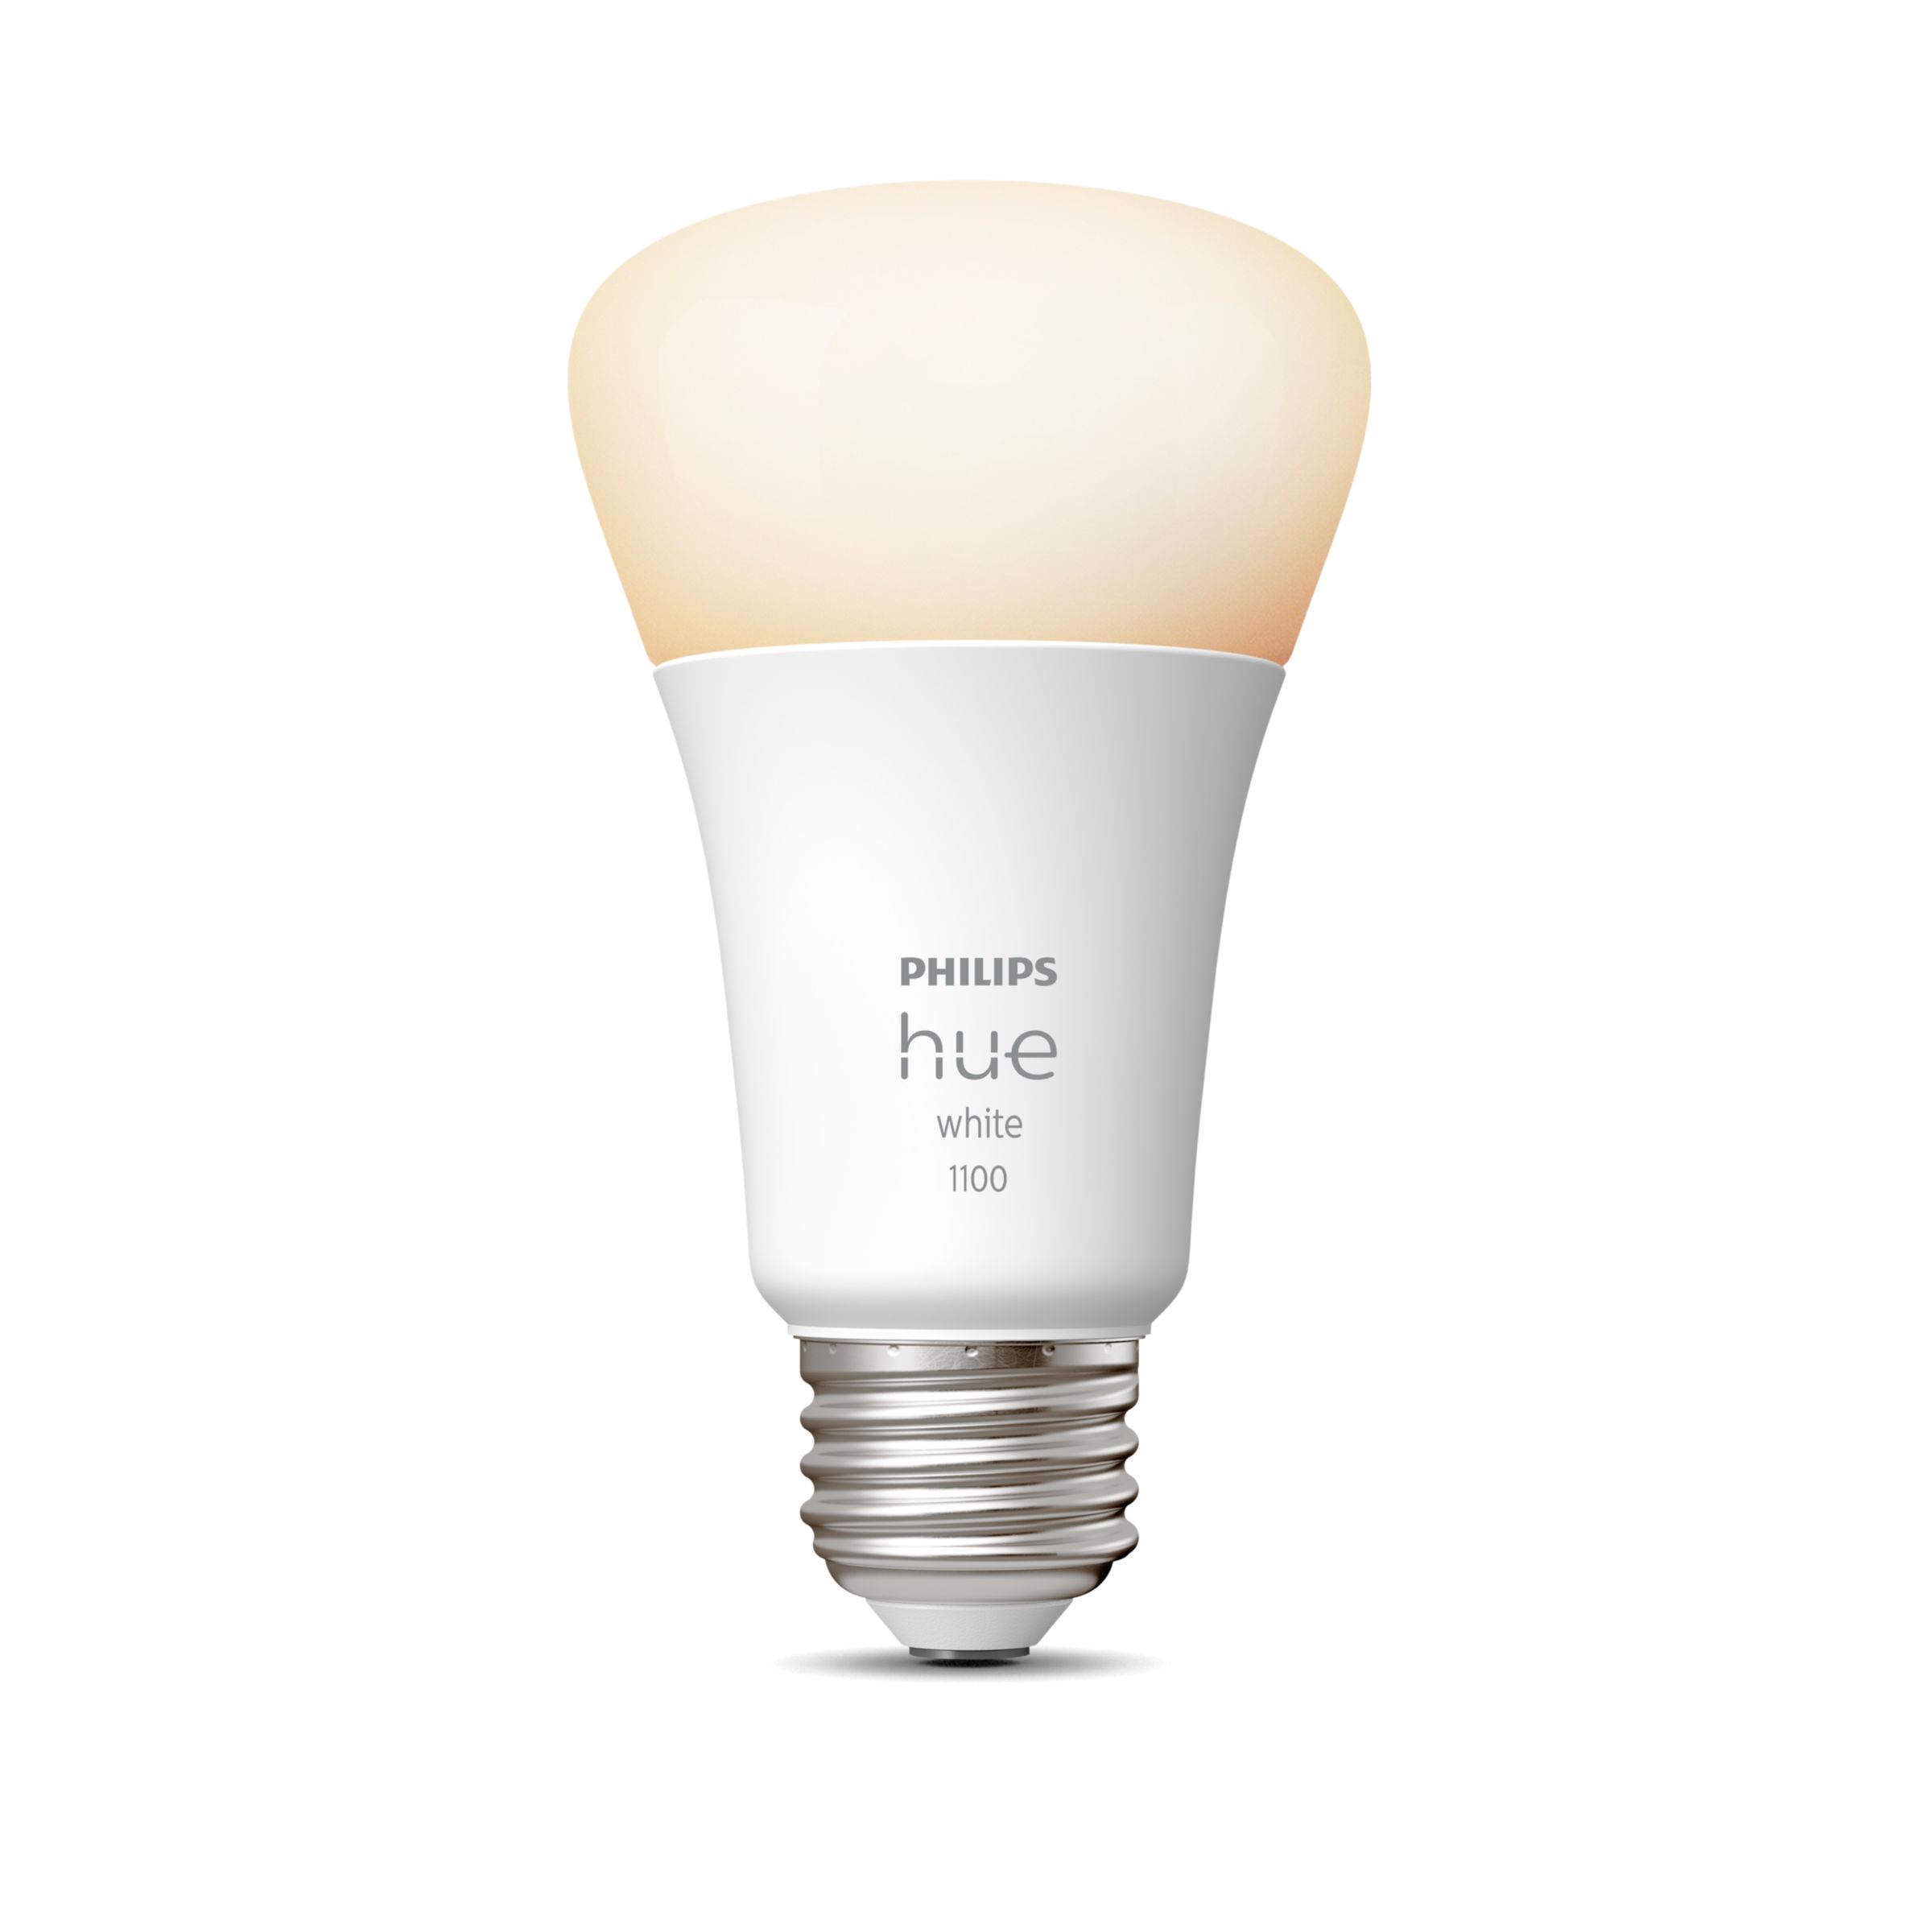 Philips Hue — Complete Beginners Guide 